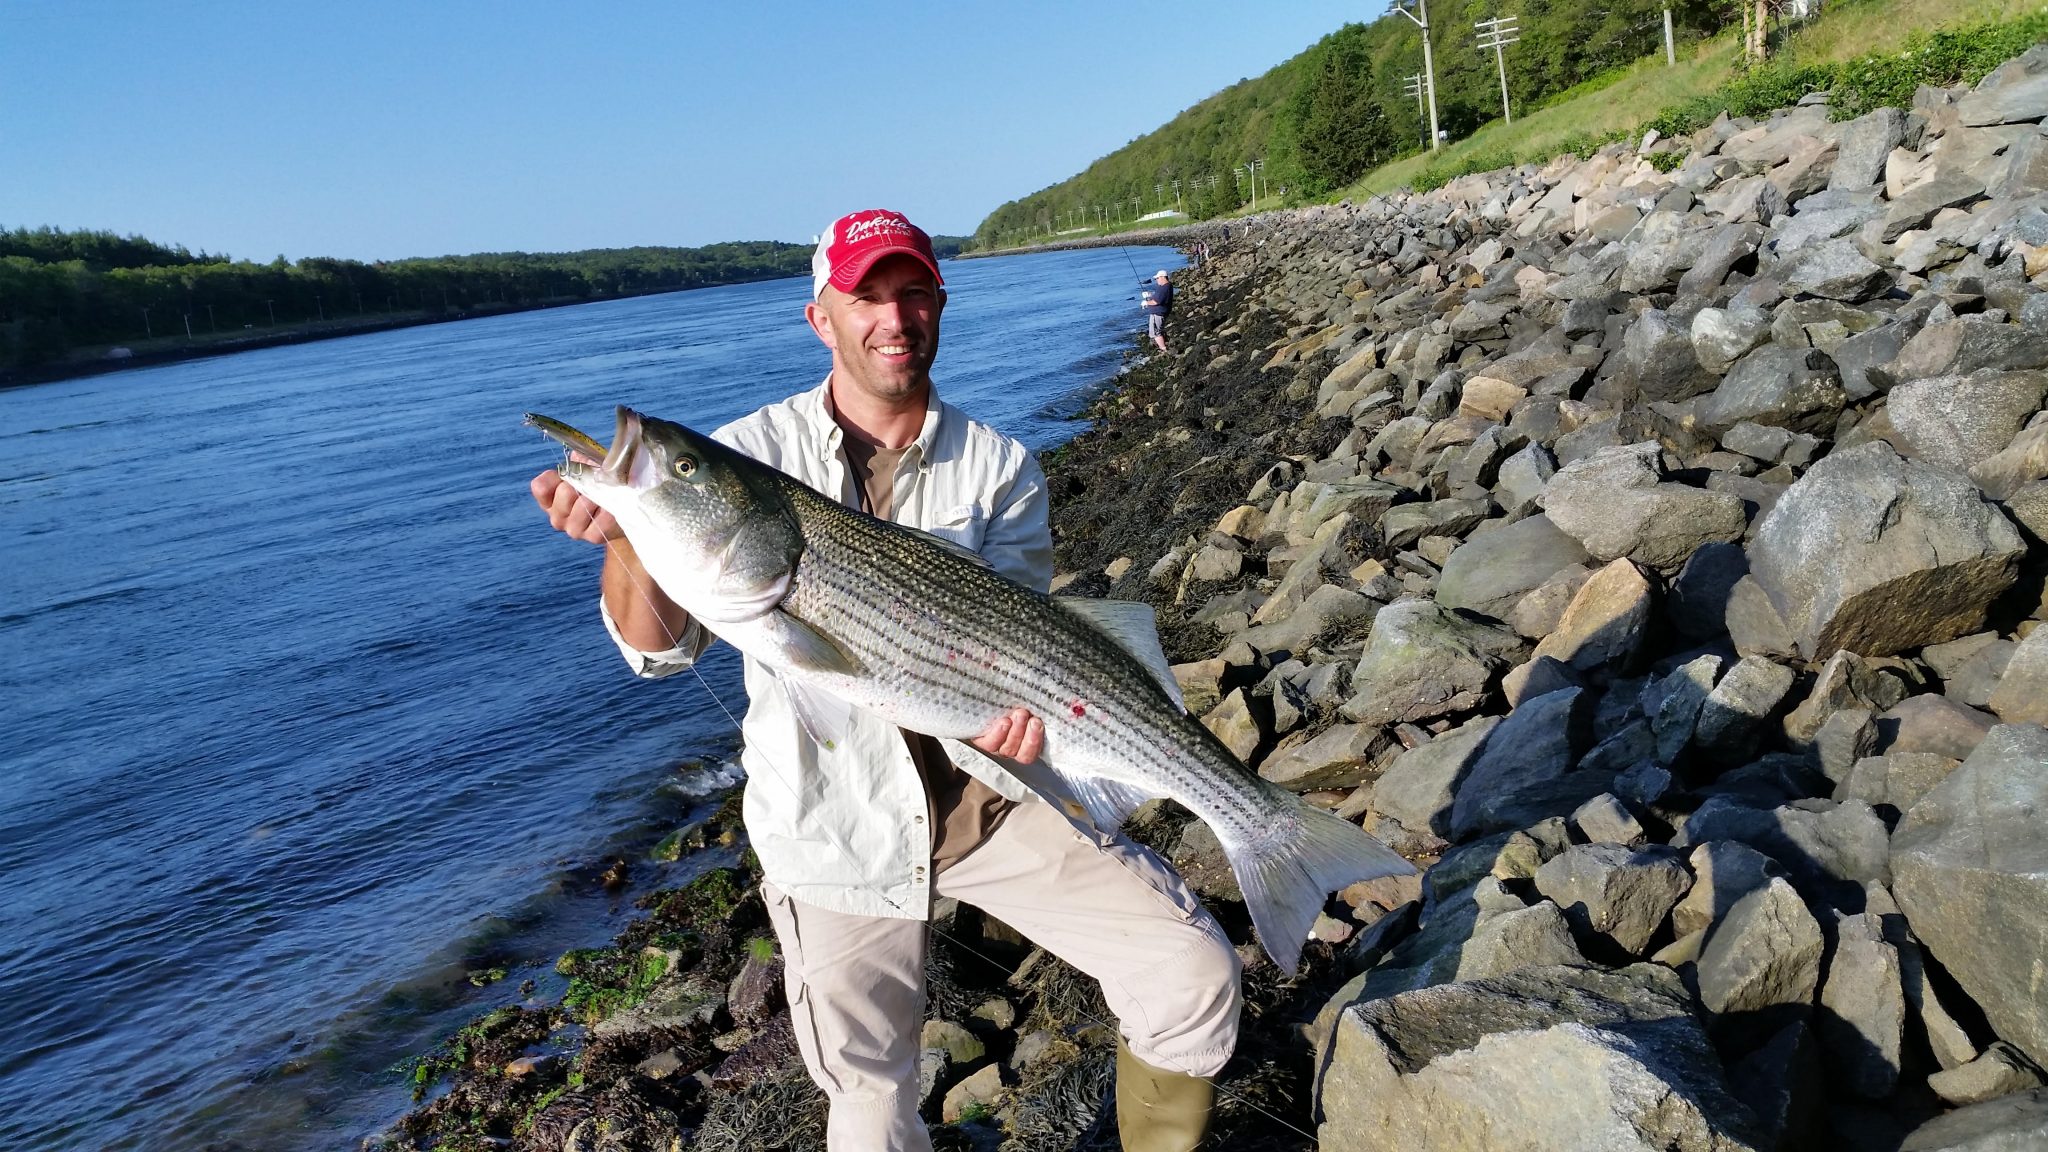 August 7th Cape Cod Canal Fishing Report